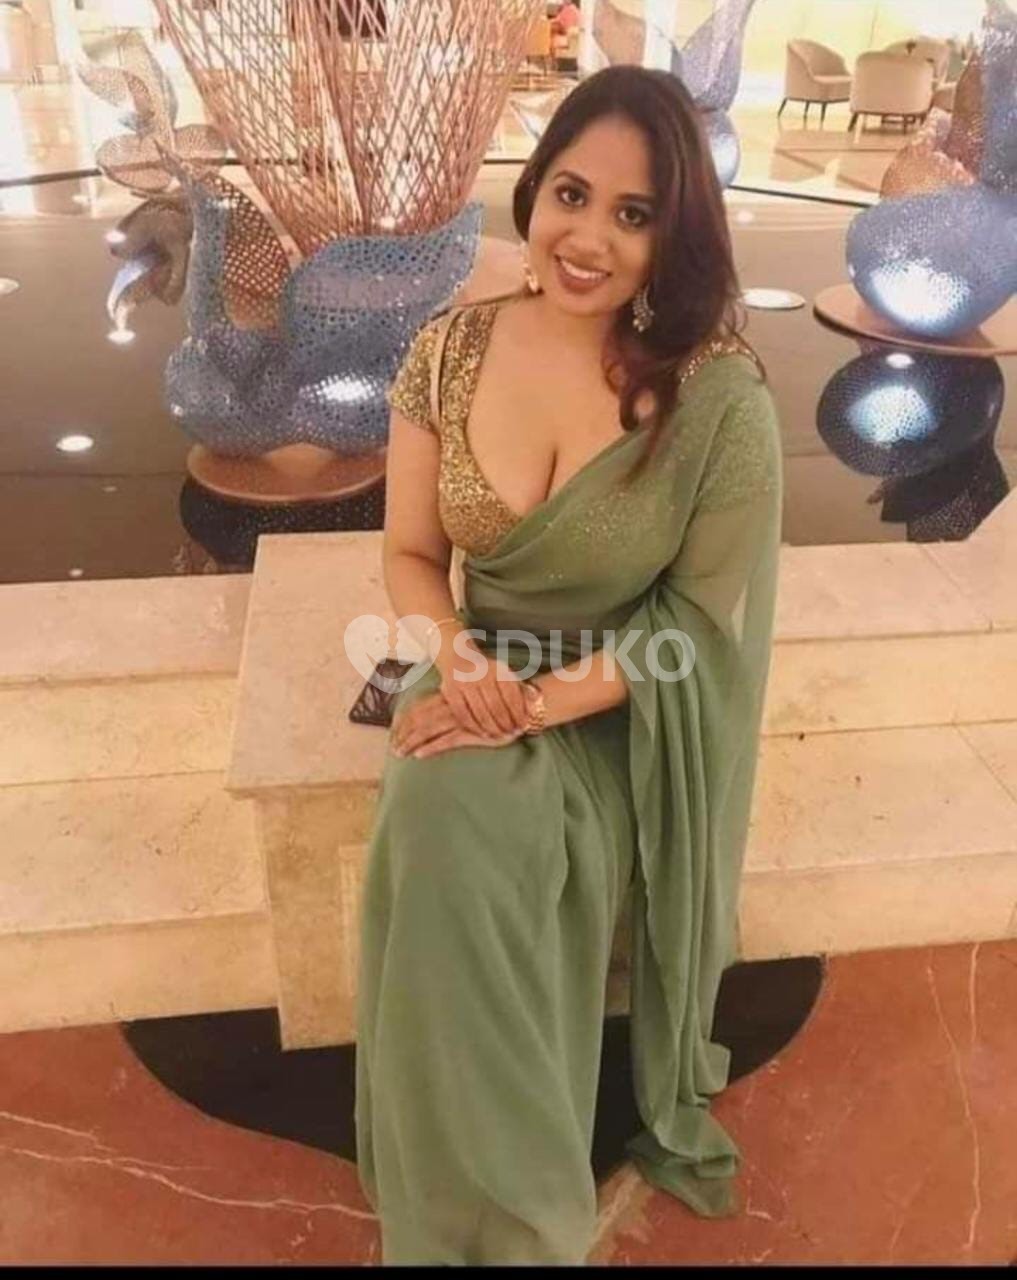 MG ROAD ☎️ LOW RATE DIVYA ESCORT FULL HARD FUCK WITH NAUGHTY IF YOU WANT TO FUCK MY PUSSY WITH BIG BOOBS GIRLS- CALL